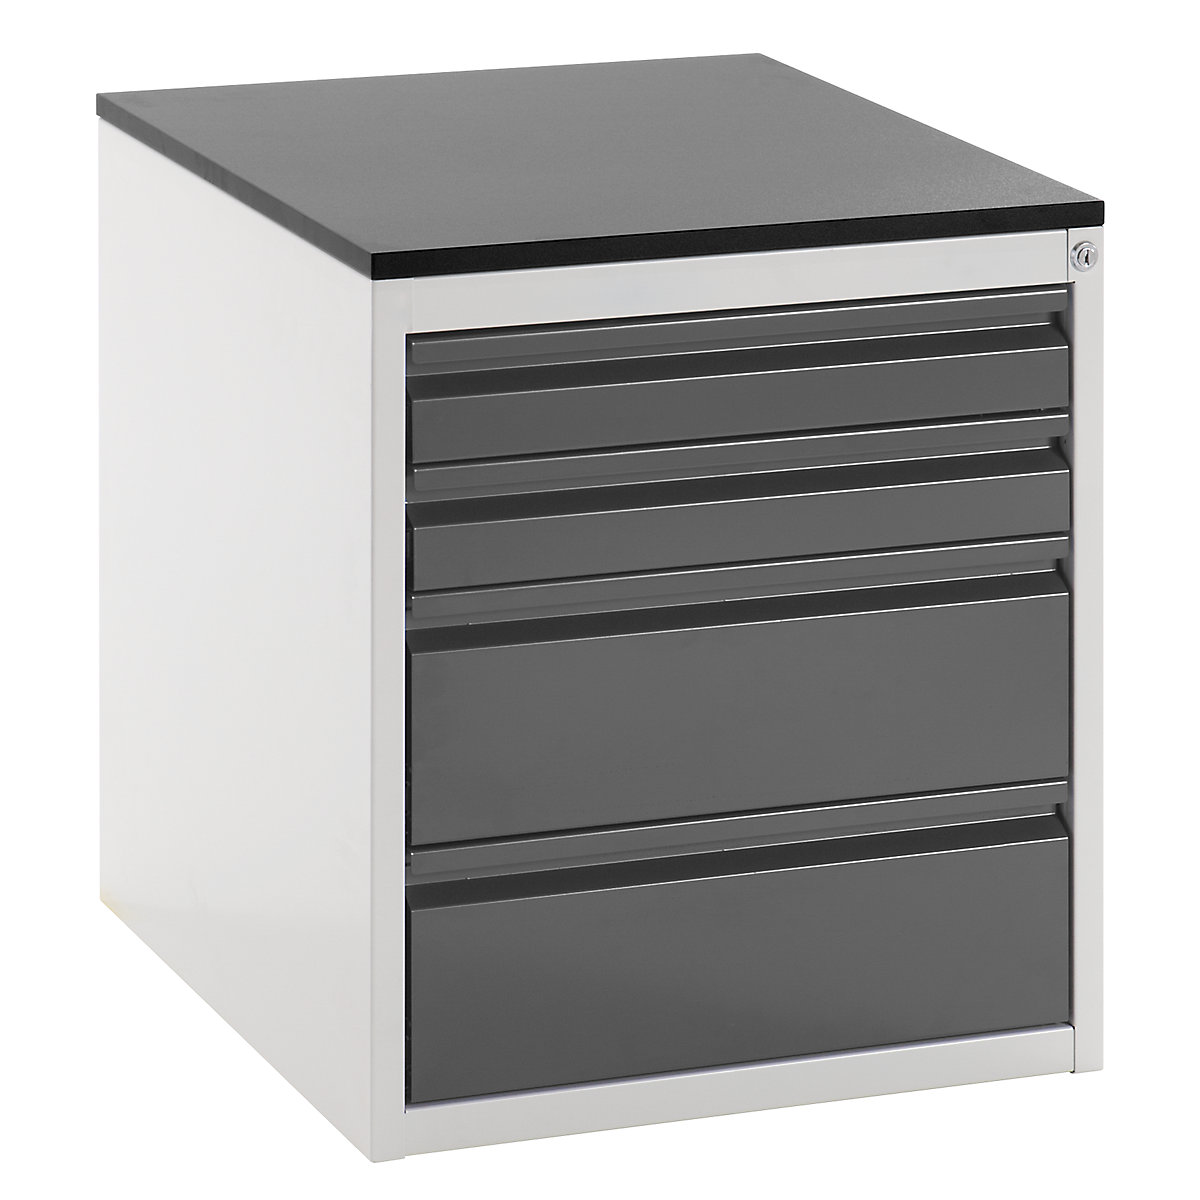 Drawer cupboard with telescopic guides – RAU, height 640 mm, drawers: 2 x 90, 2 x 180 mm, light grey / metallic charcoal, width 580 mm-1